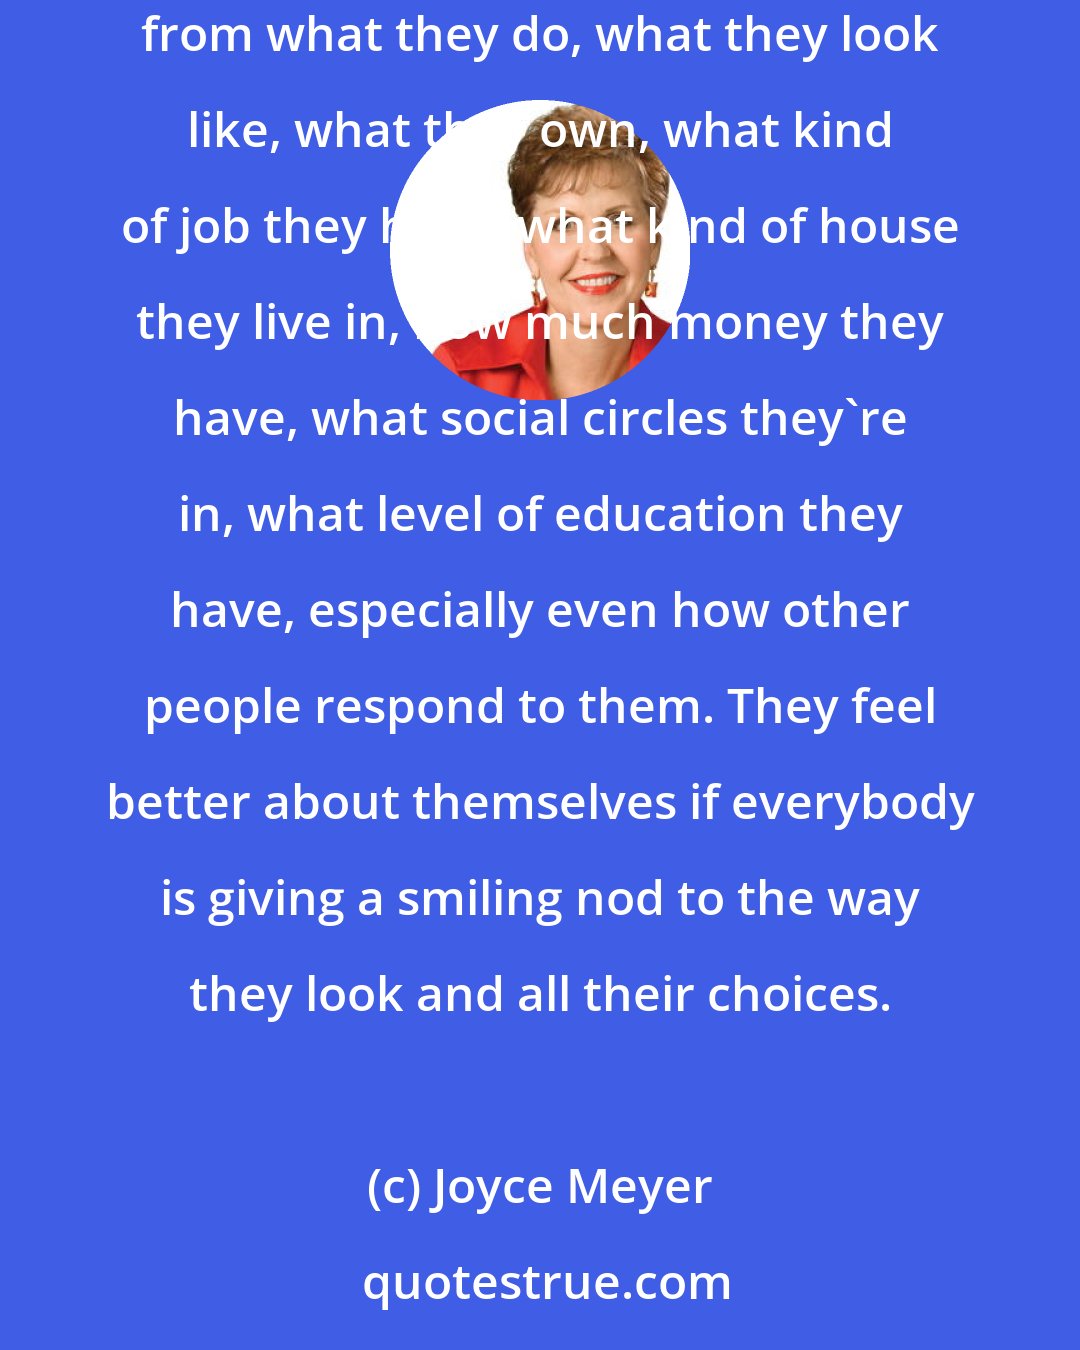 Joyce Meyer: I believe that a lot of people in our society today, people who have been hurt and even people who haven't been hurt, get their worth and value from what they do, what they look like, what they own, what kind of job they have, what kind of house they live in, how much money they have, what social circles they're in, what level of education they have, especially even how other people respond to them. They feel better about themselves if everybody is giving a smiling nod to the way they look and all their choices.